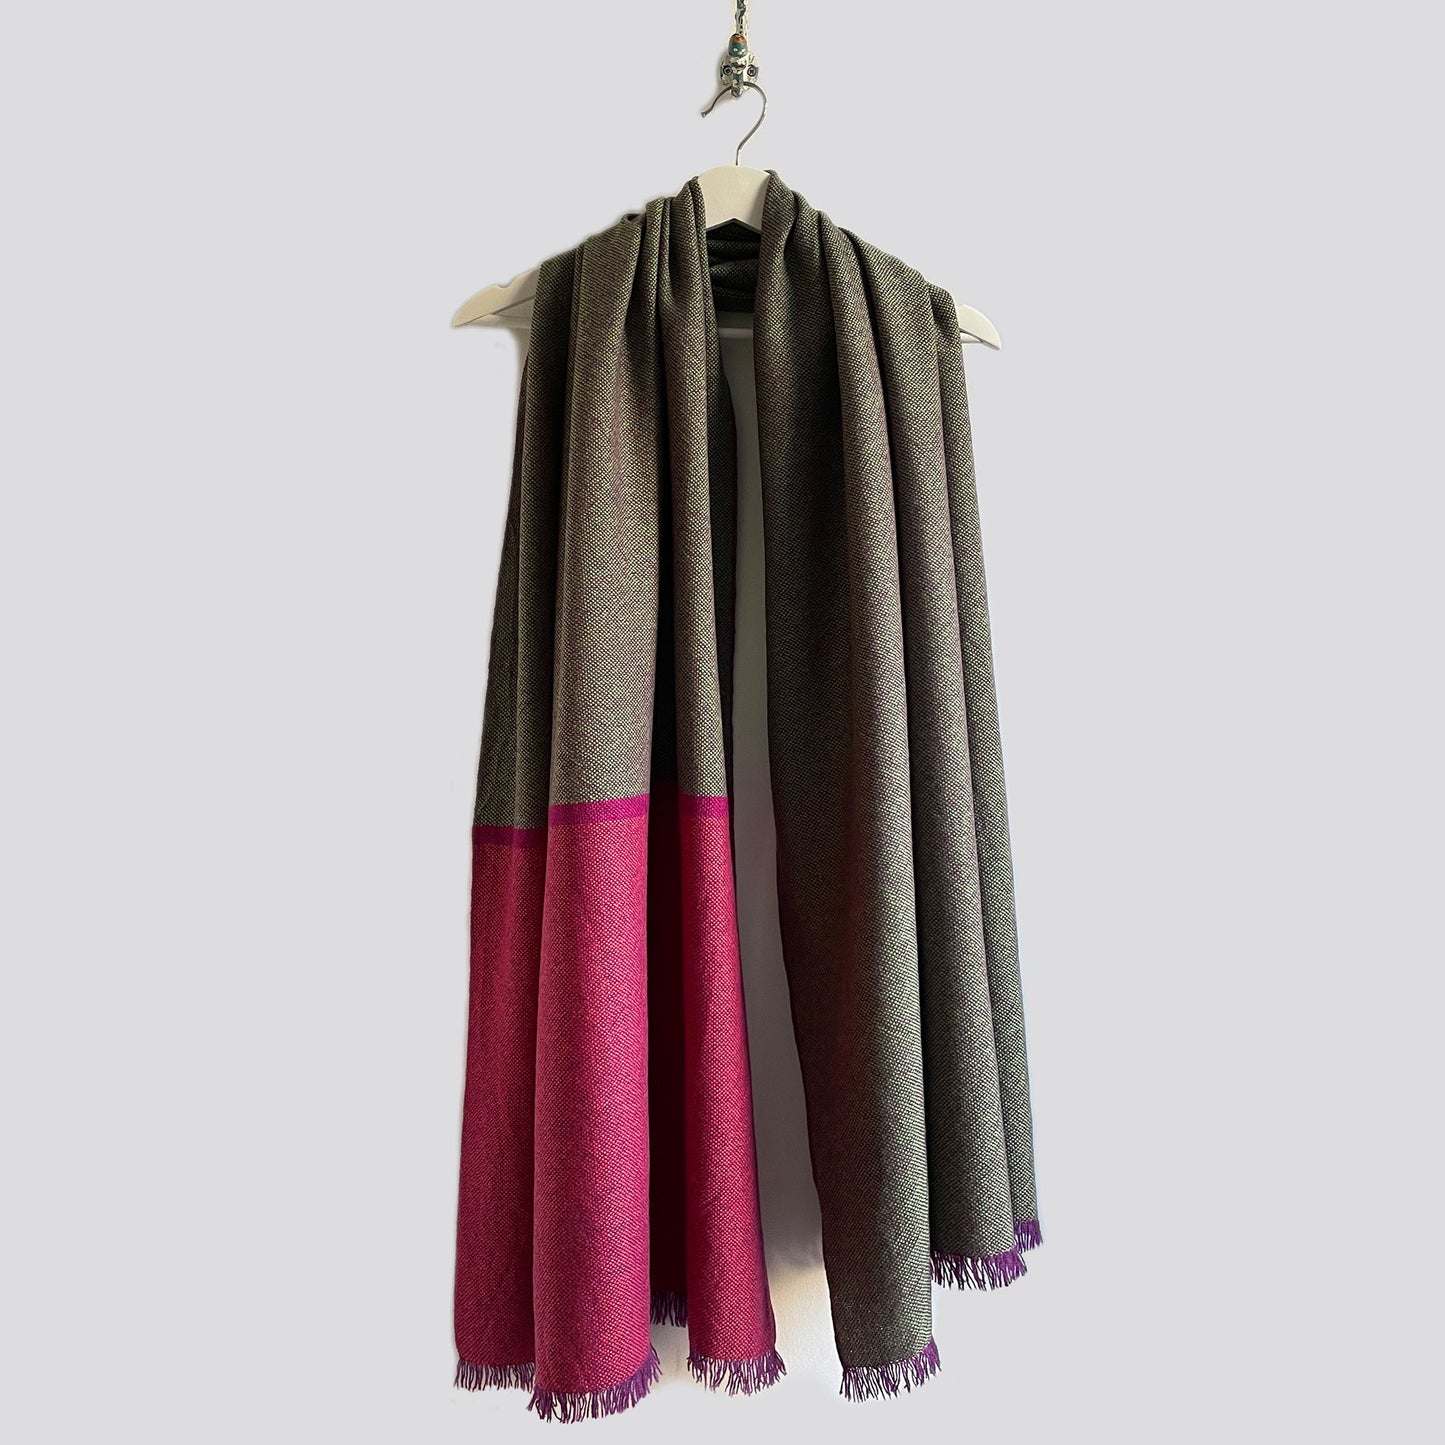 Large Silky Light Weave Shawl Scarves